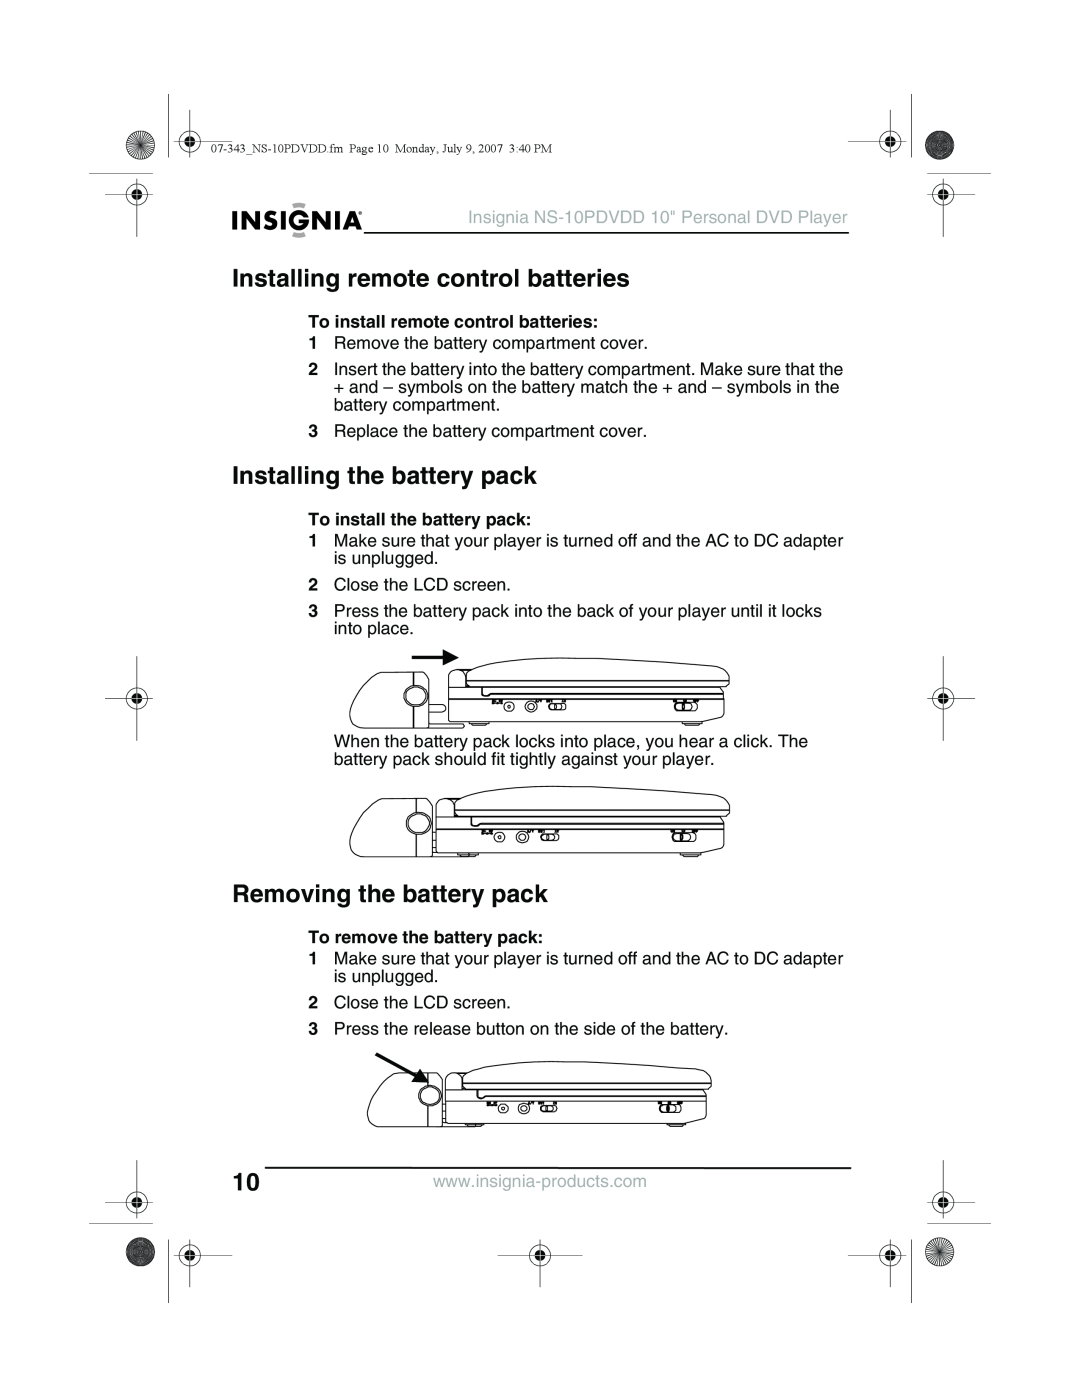 Insignia NS-10PDVDD manual Installing remote control batteries, Installing the battery pack, Removing the battery pack 